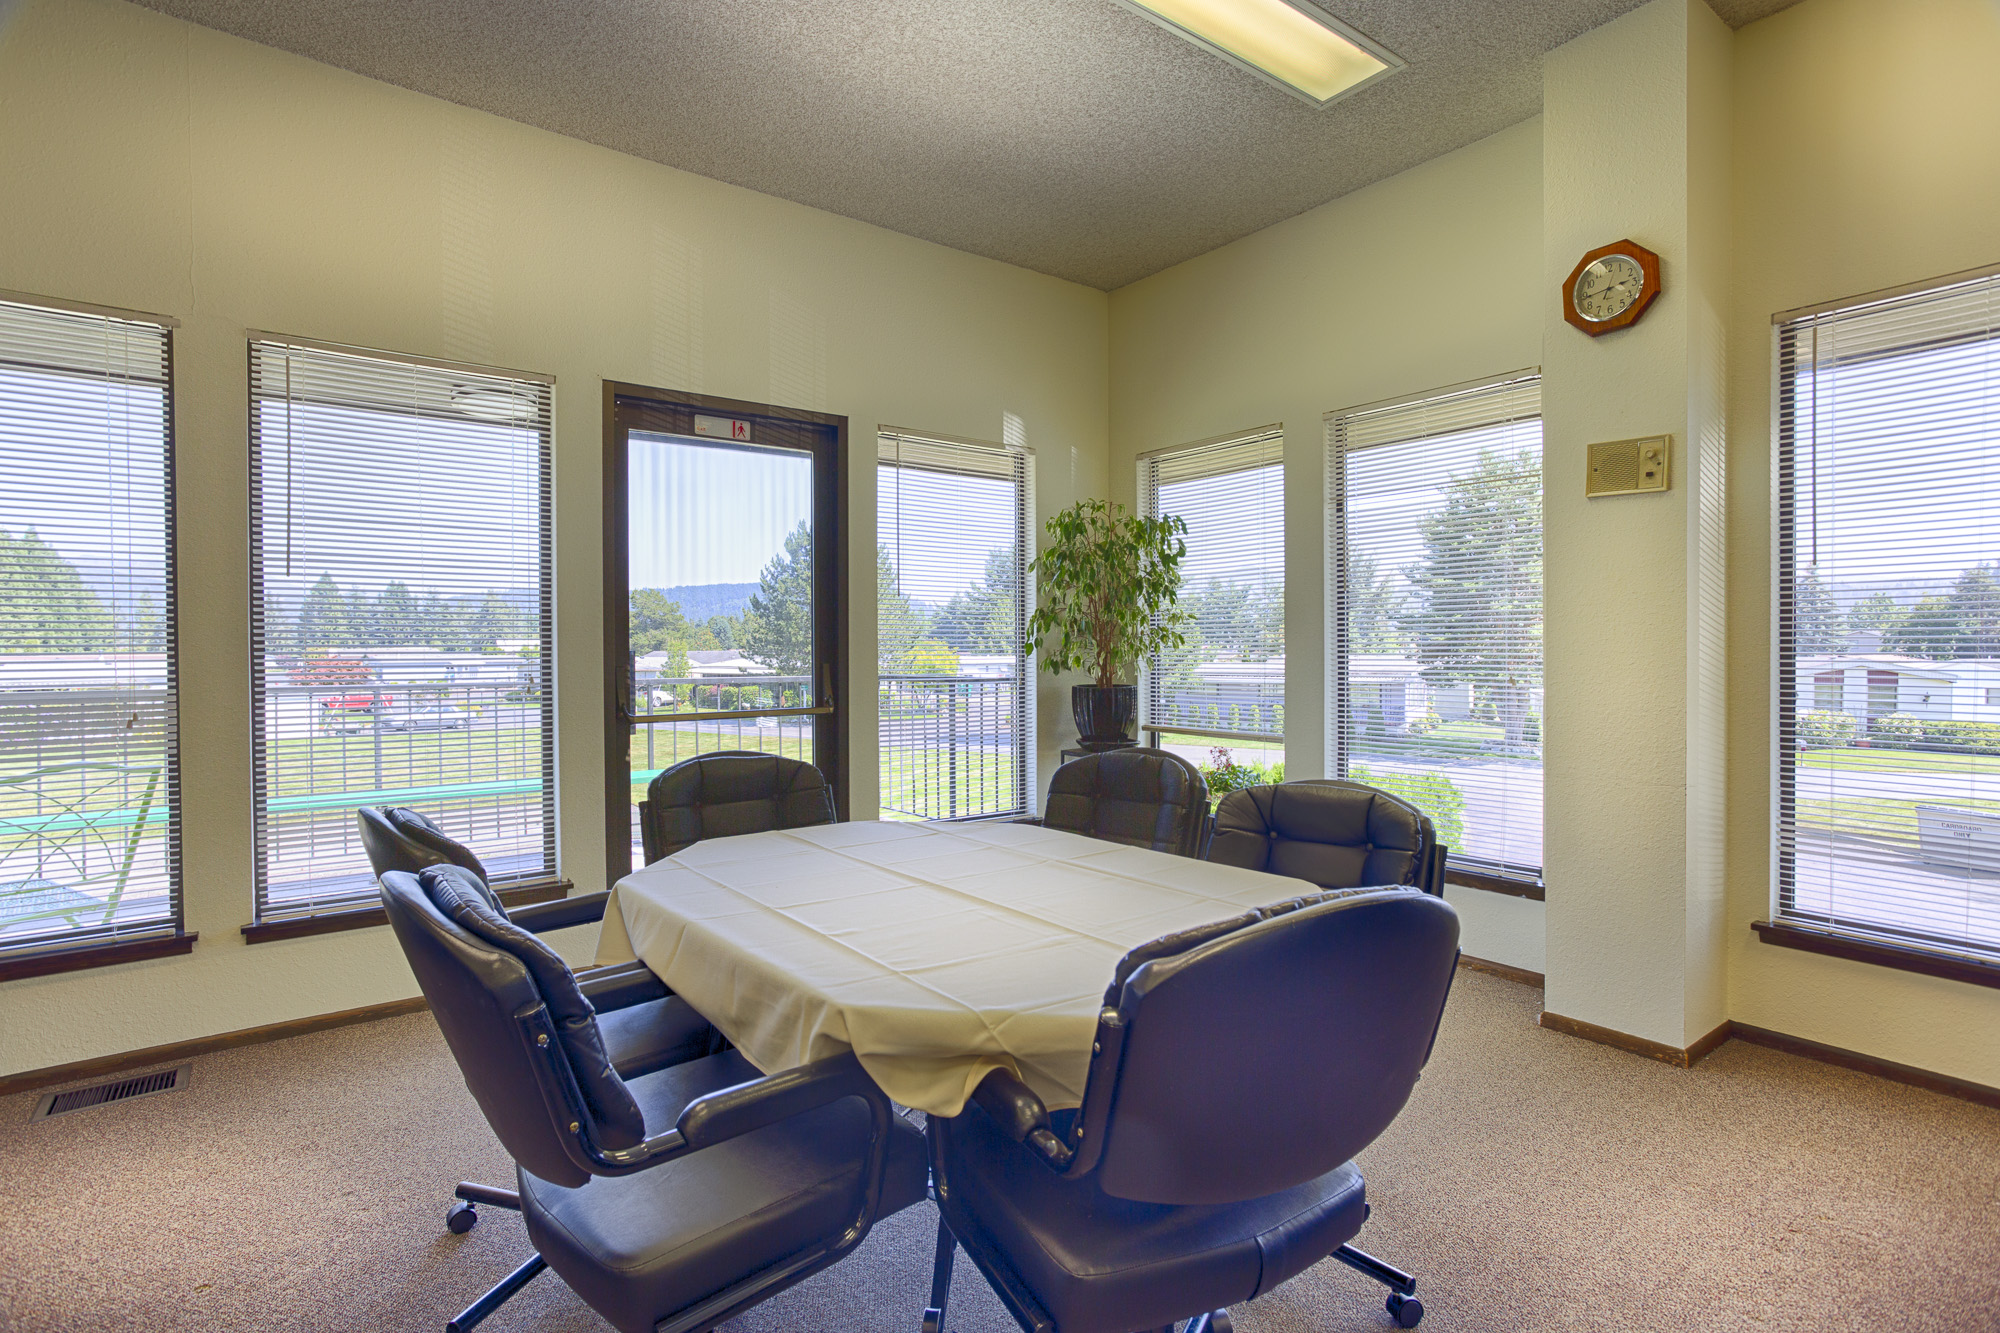 Oval table within the community center that fits six seats comfortably. Cushioned seats surround the table and have a beautiful view of the outdoors through the windows along the walls.